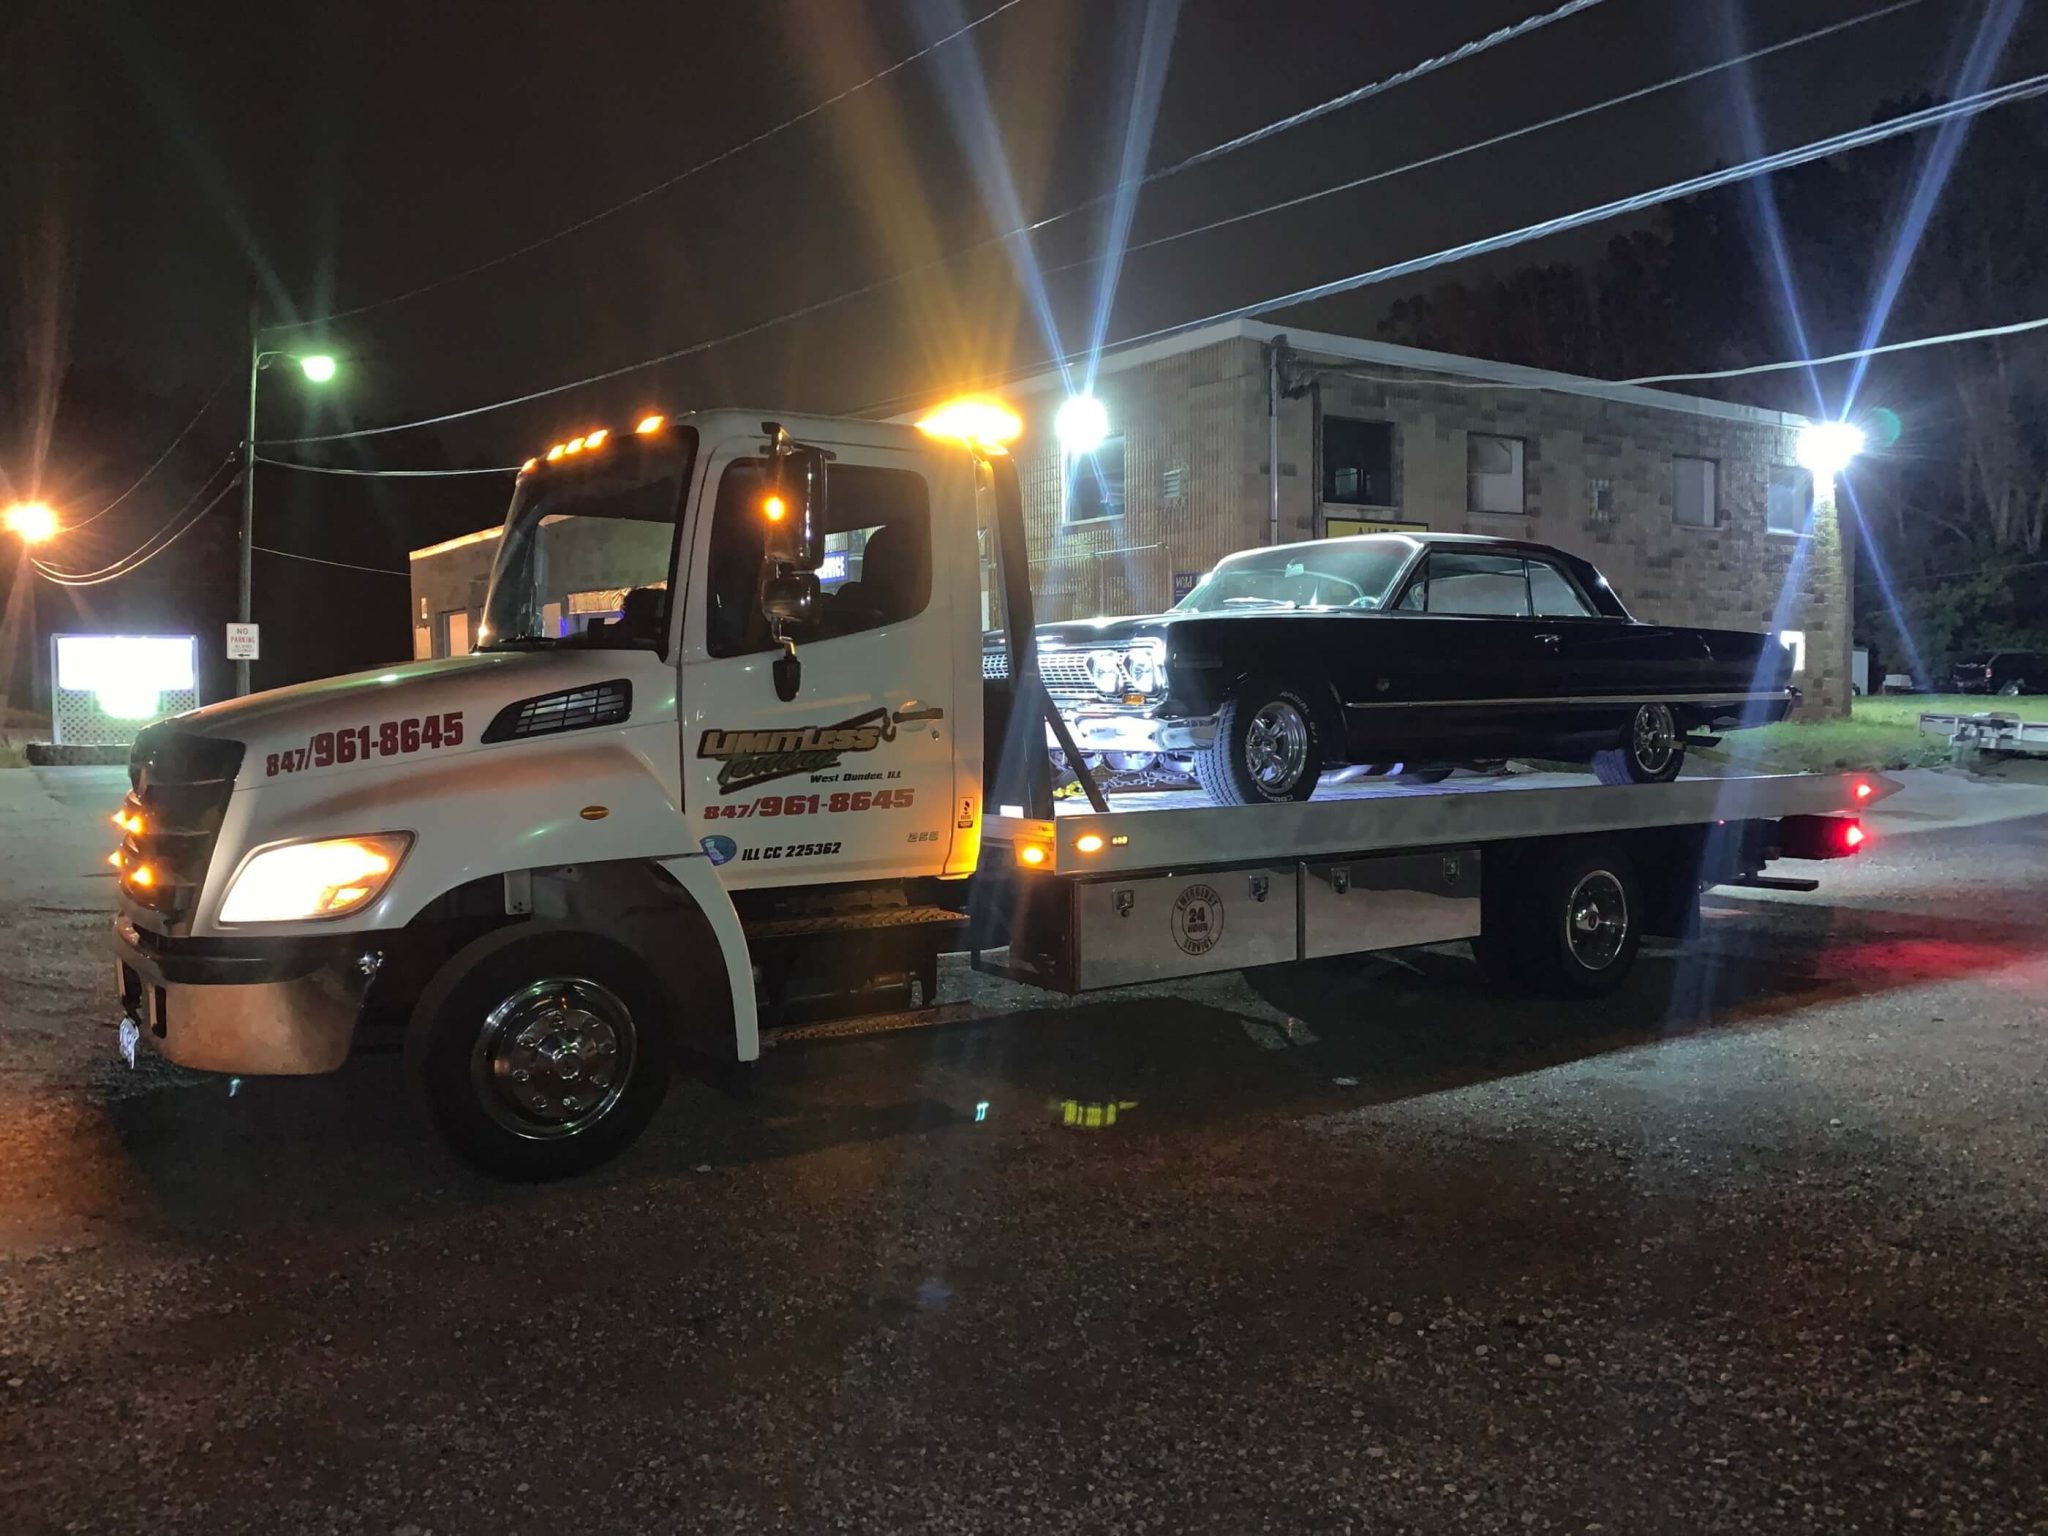 Areas We Service - Limitless Towing